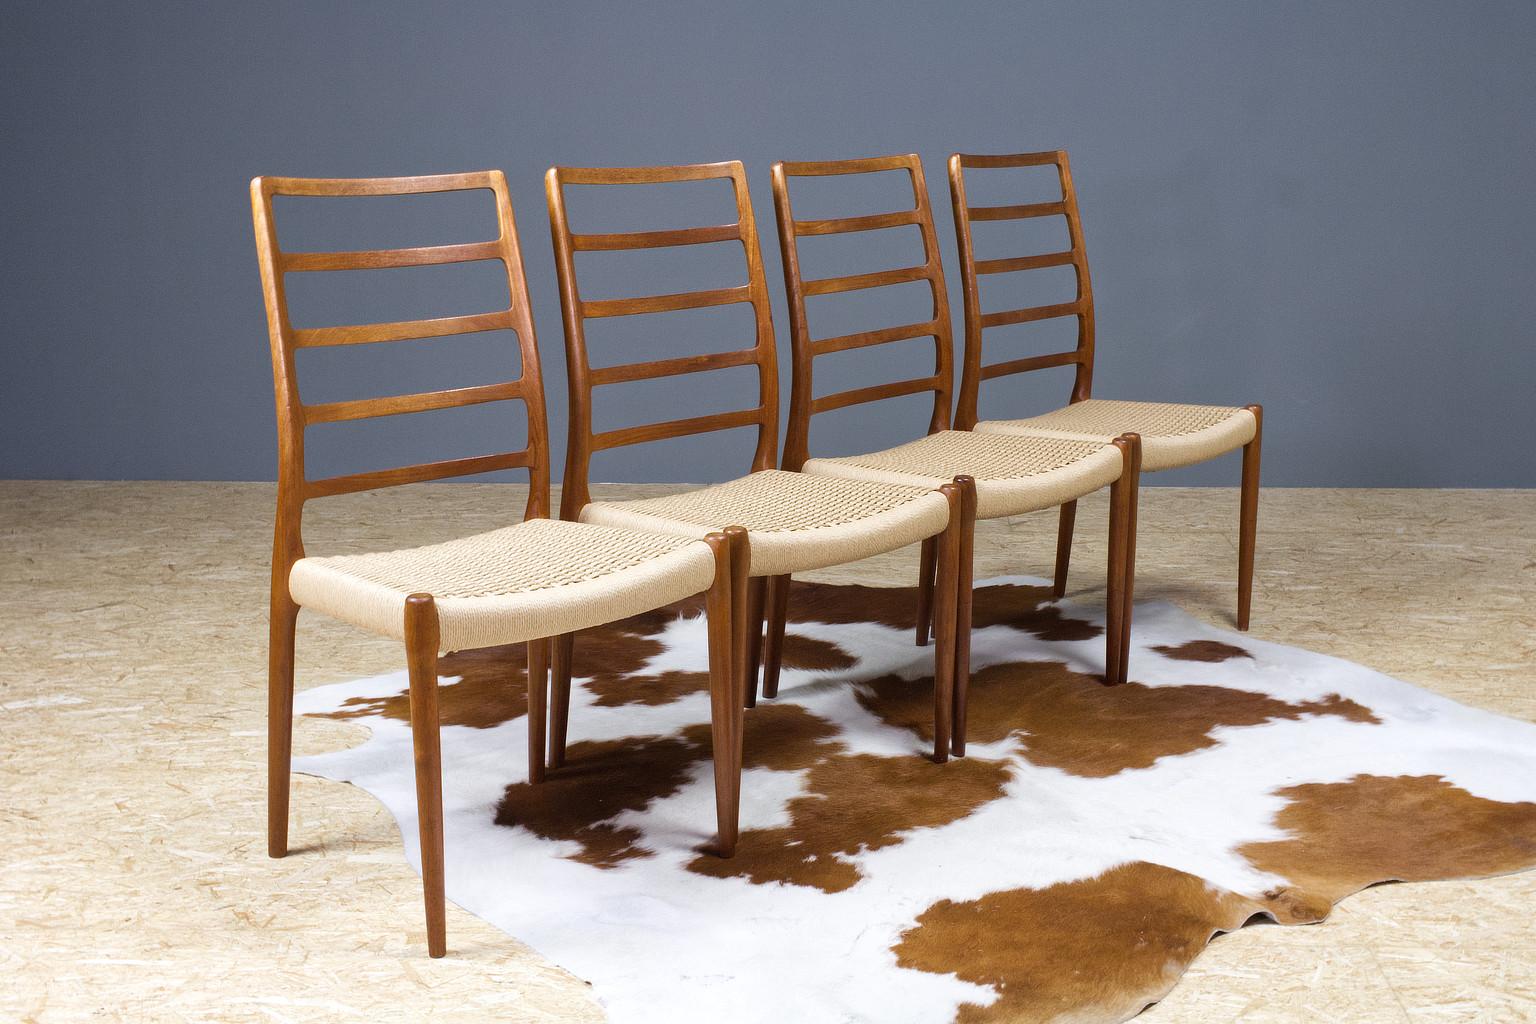 Organically shaped high back dining room chairs, model 82, designed in 1954 by Niels O. Moller for J.L. Møller Møbelfabrik.

The set of 4 is in excellent condition. The seating has been completely renewed. In extreme good condition.

All chairs